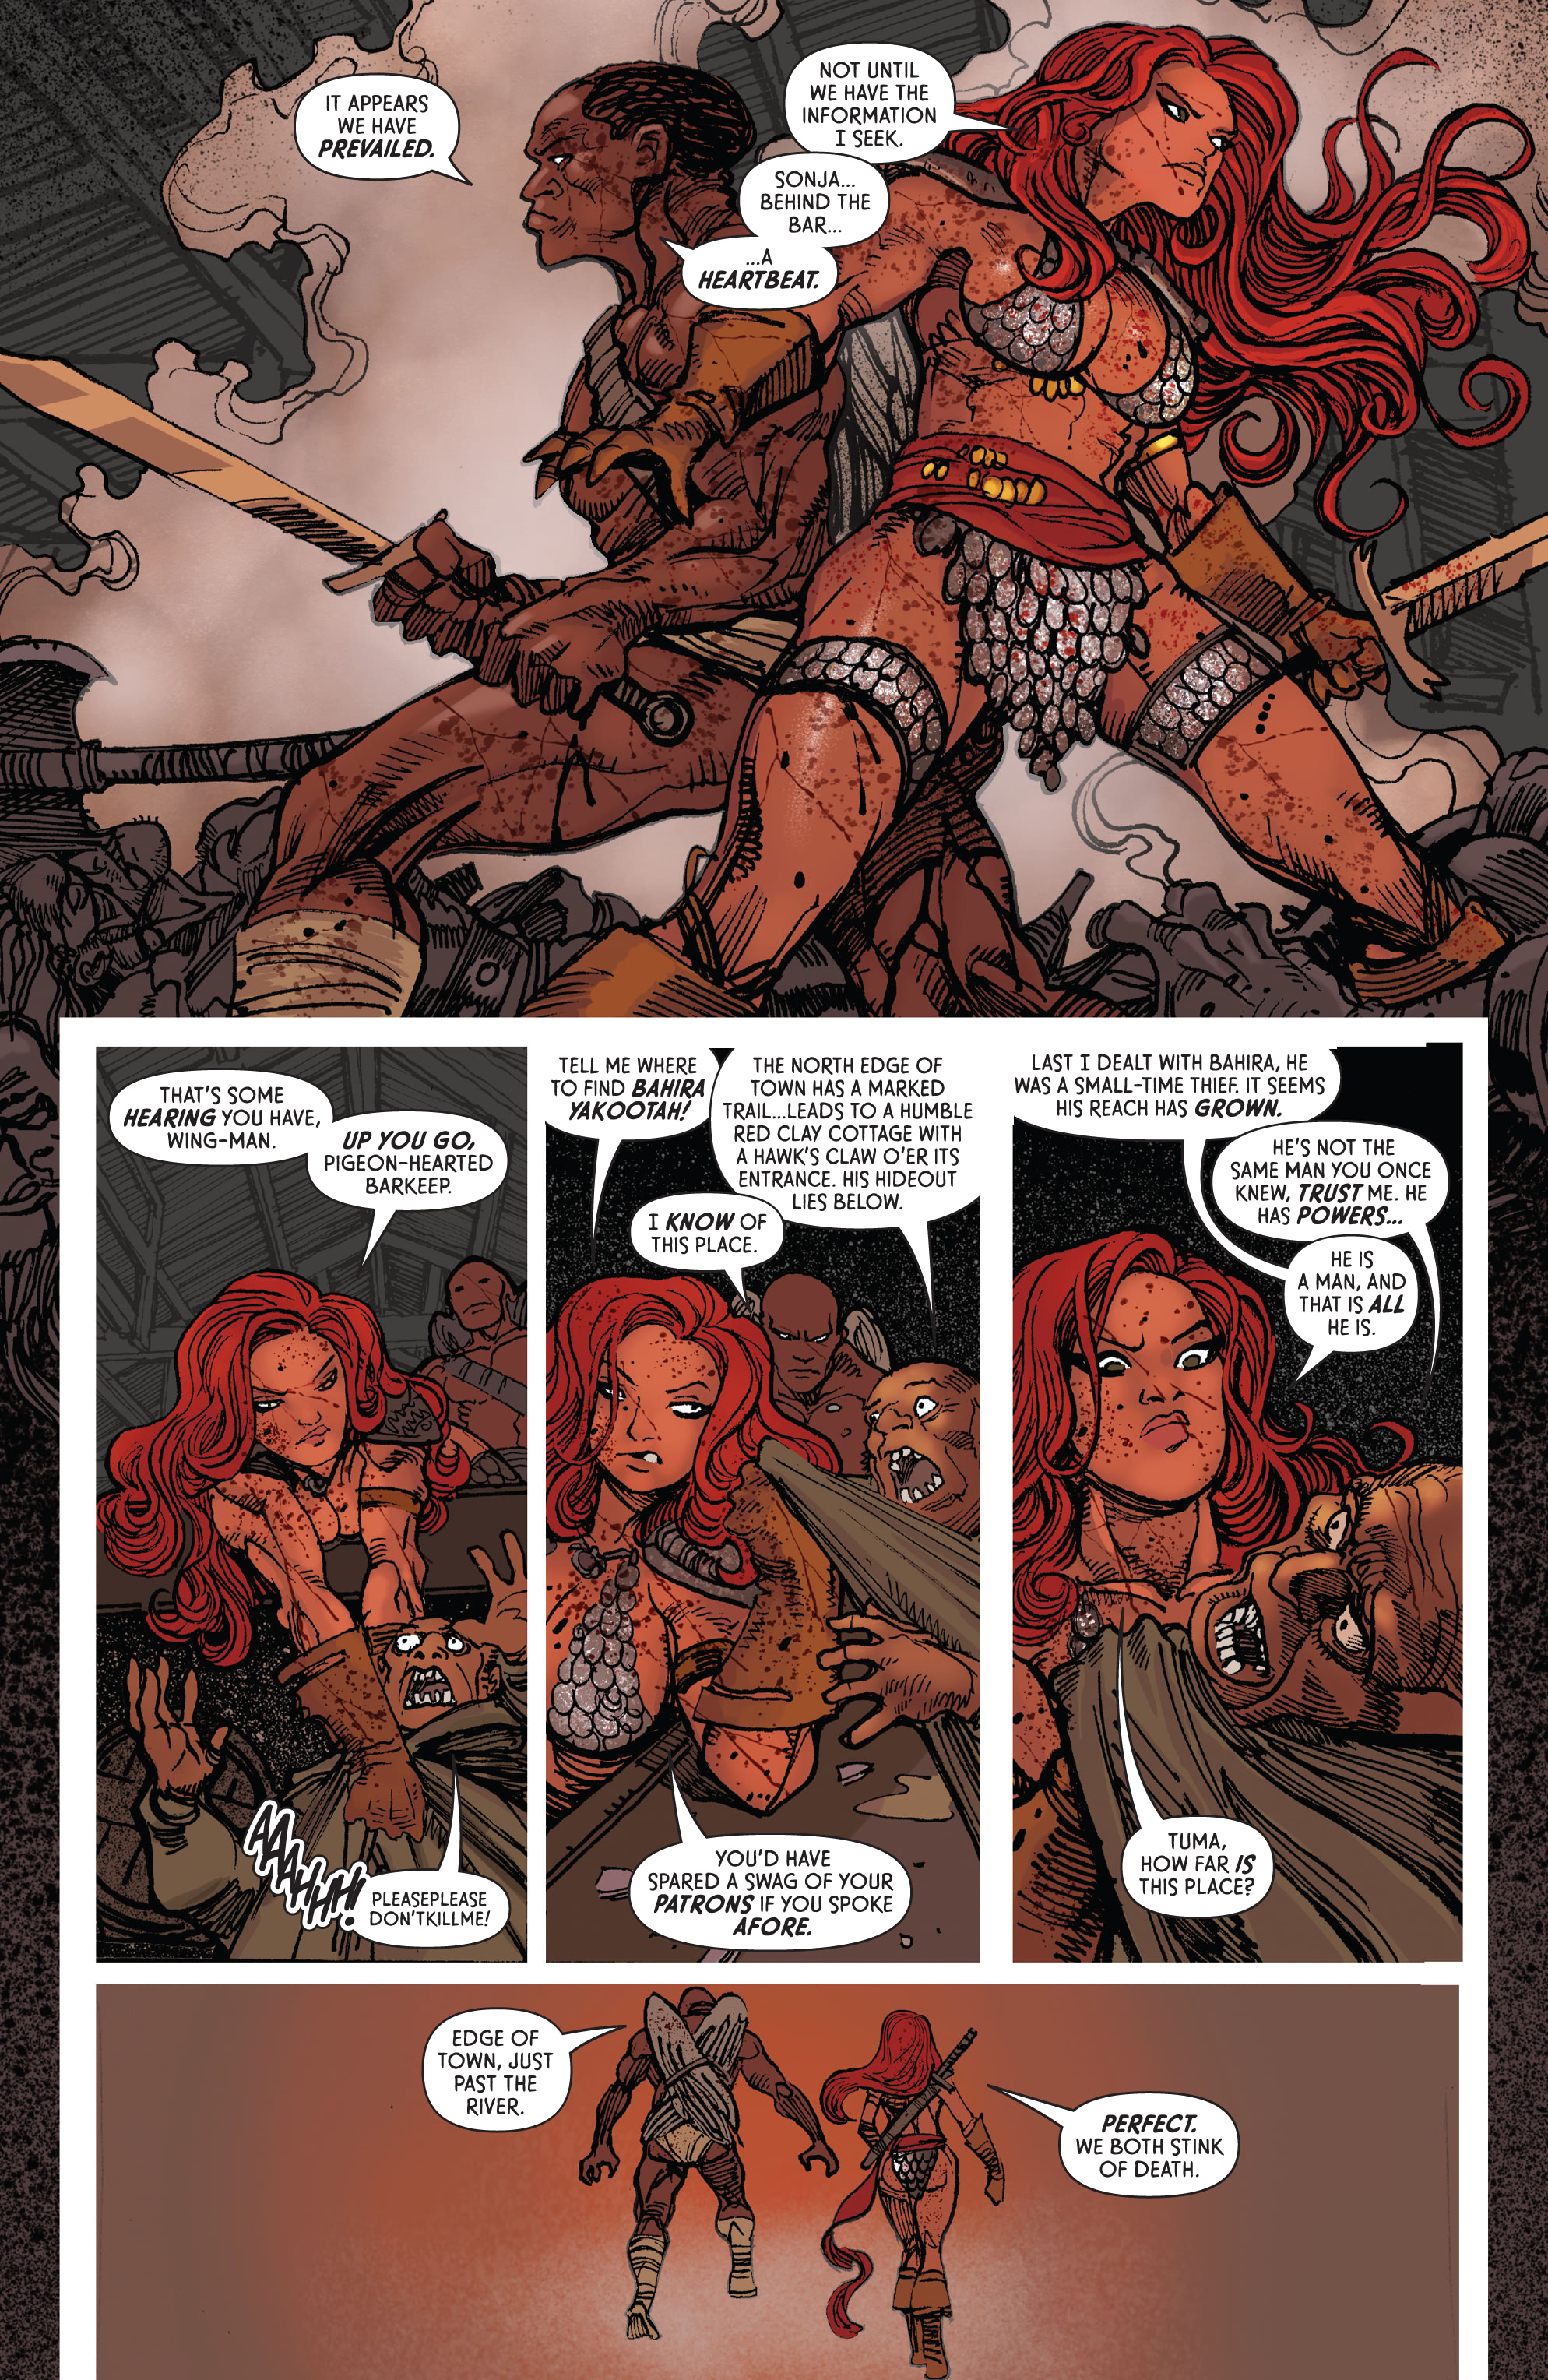 The Invincible Red Sonja 003 013